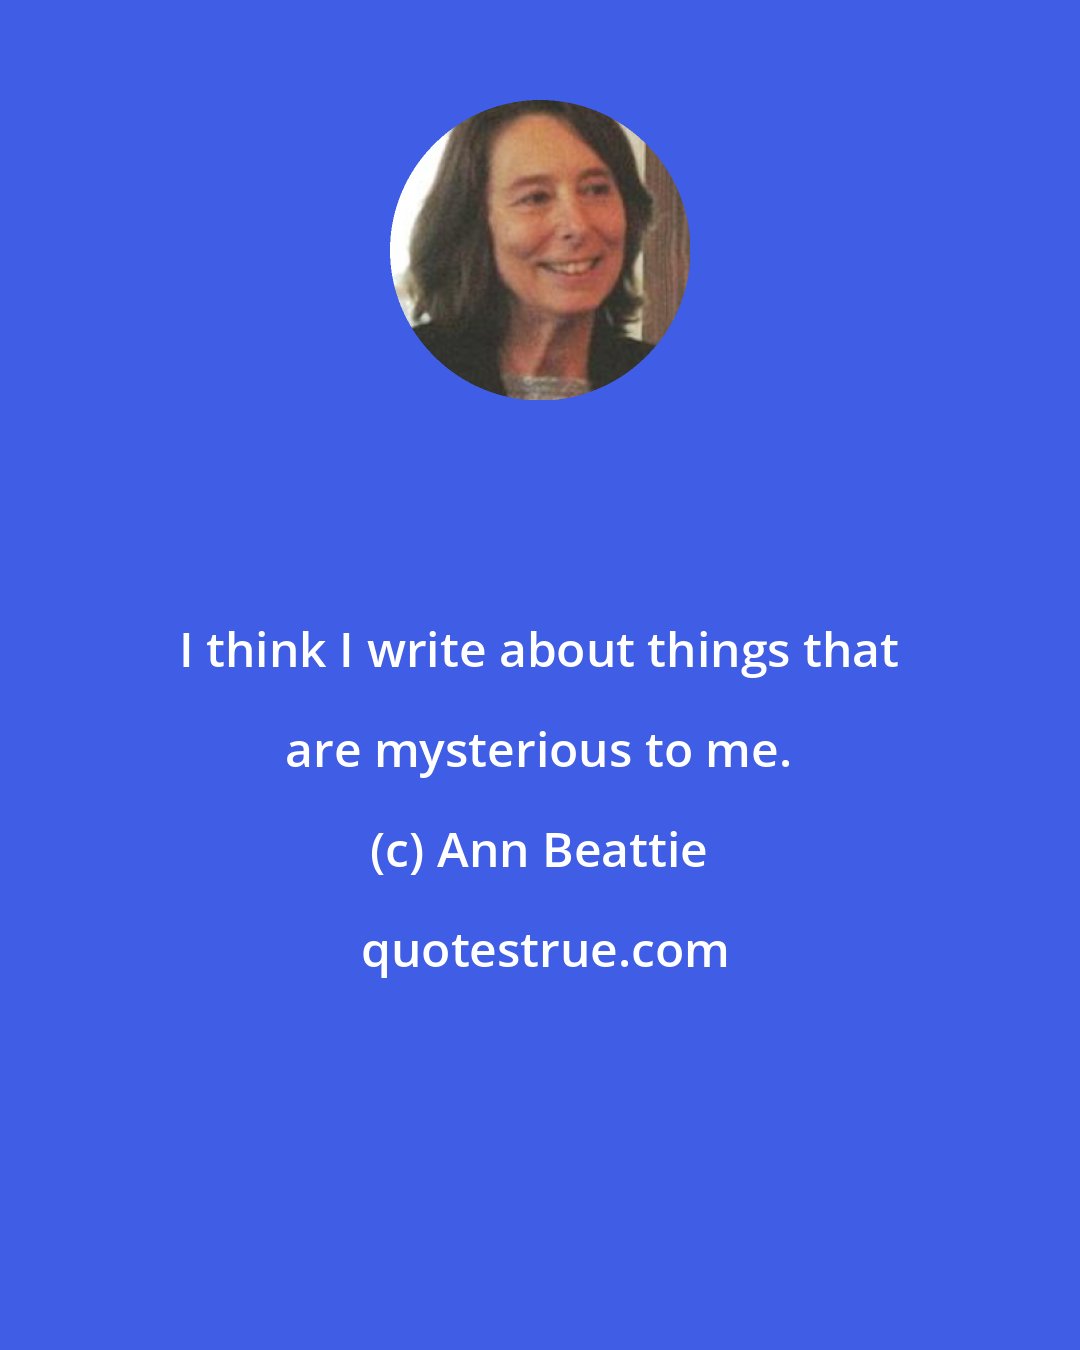 Ann Beattie: I think I write about things that are mysterious to me.